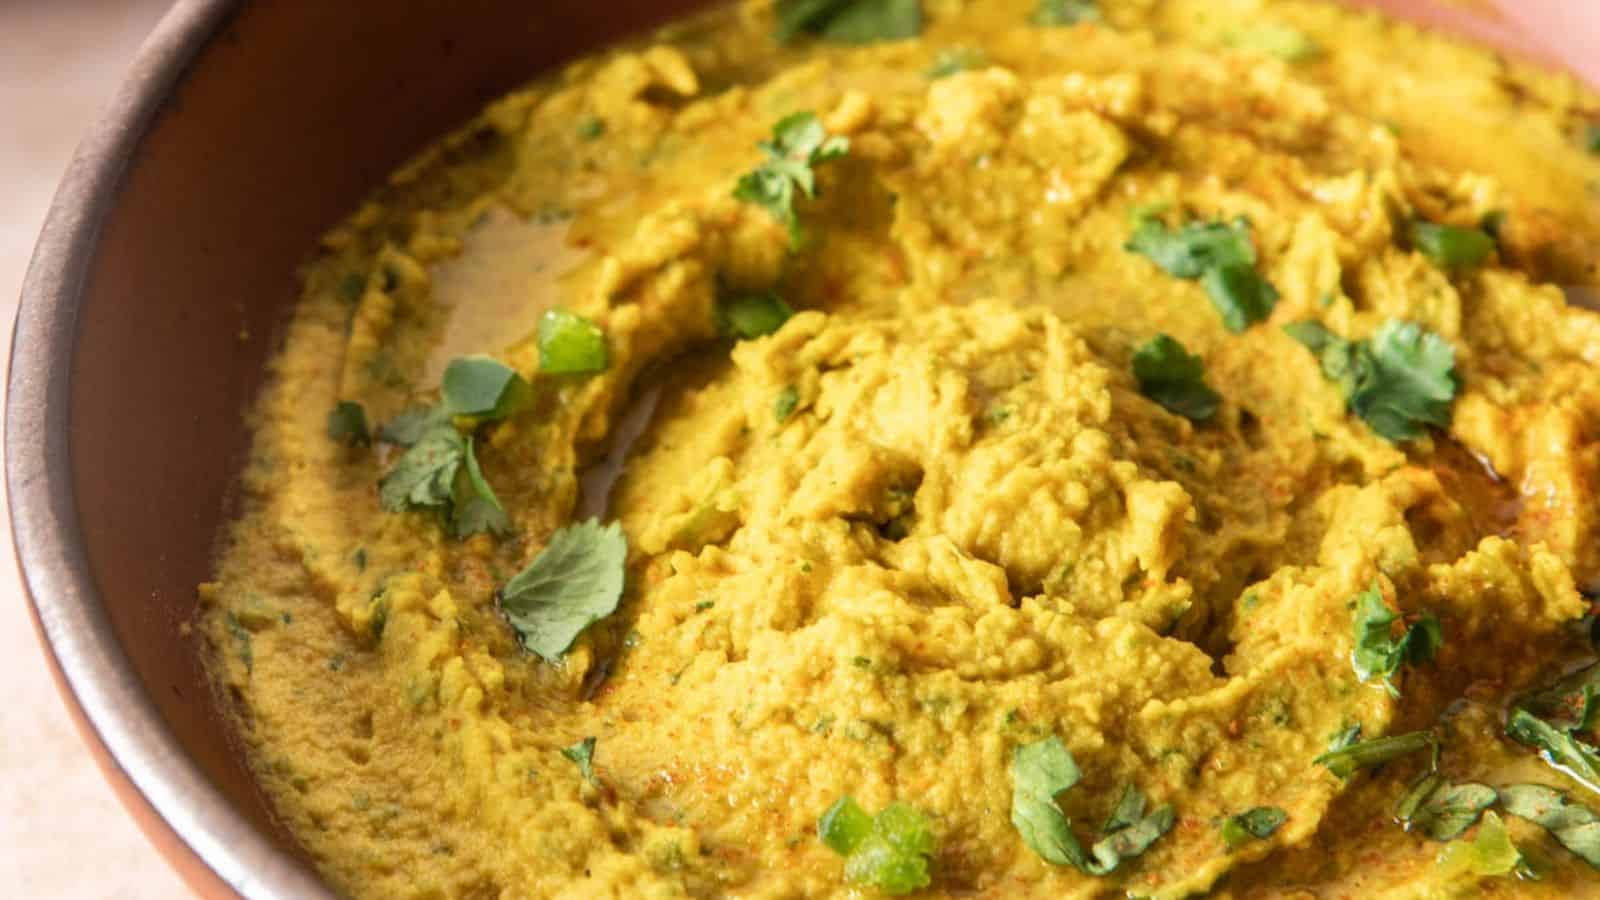 A close up image of spicy chickpea dip in a bowl.